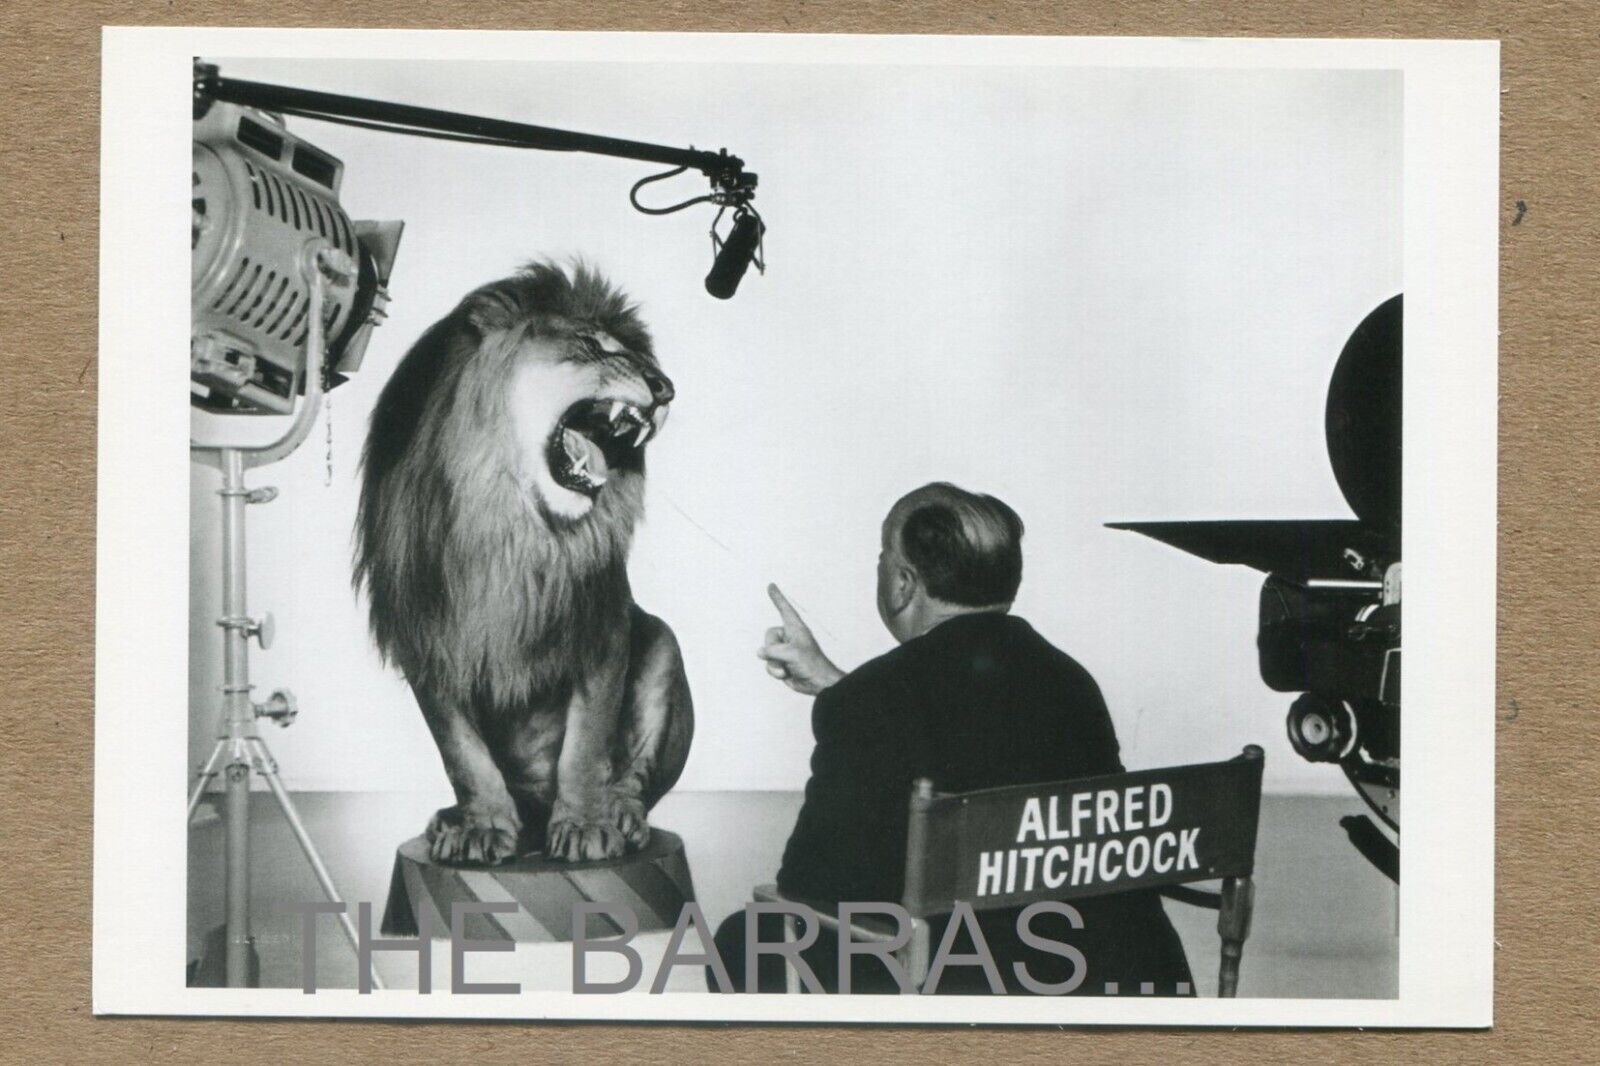 ALFRED HITCHCOCK, MGM LION, 1958 Photo Clarence Sinclair Bull FOTOFOLIO POSTCARD